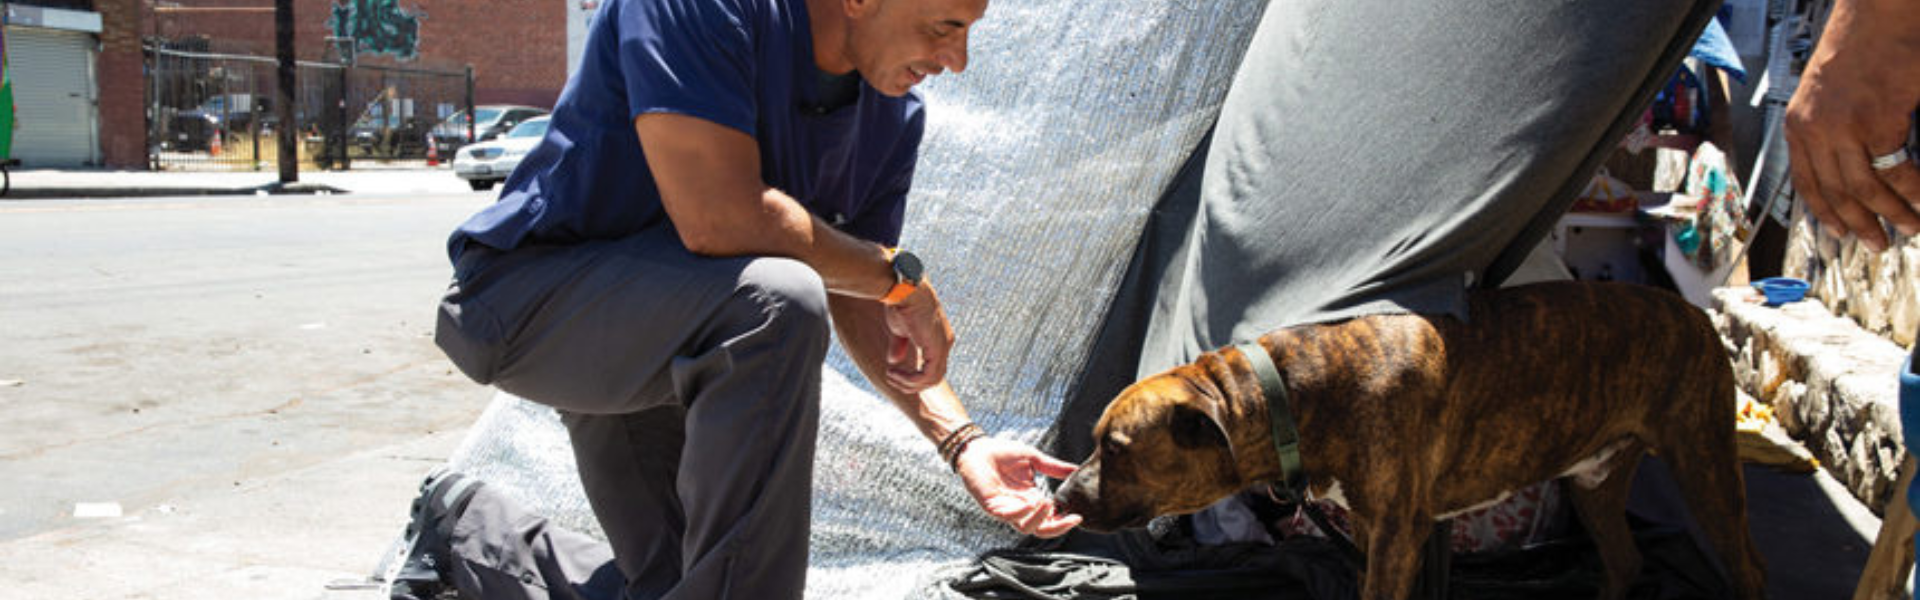 Street Vet Charity Worker with a Homeless Dog